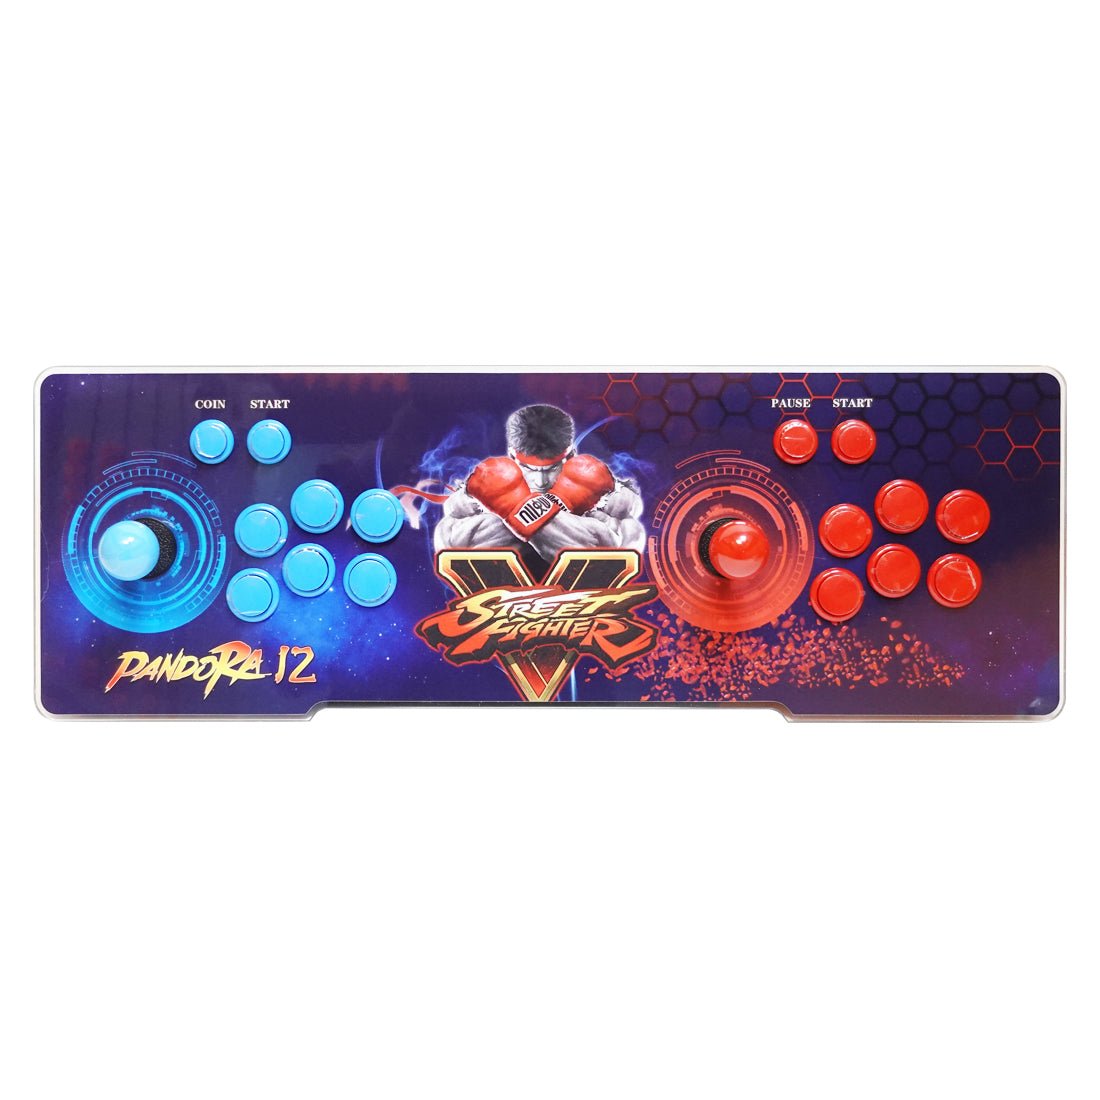 Arcade Saga EX2 3D Street Fighter WIFI 10000 Games Console - Red/Blue - Store 974 | ستور ٩٧٤